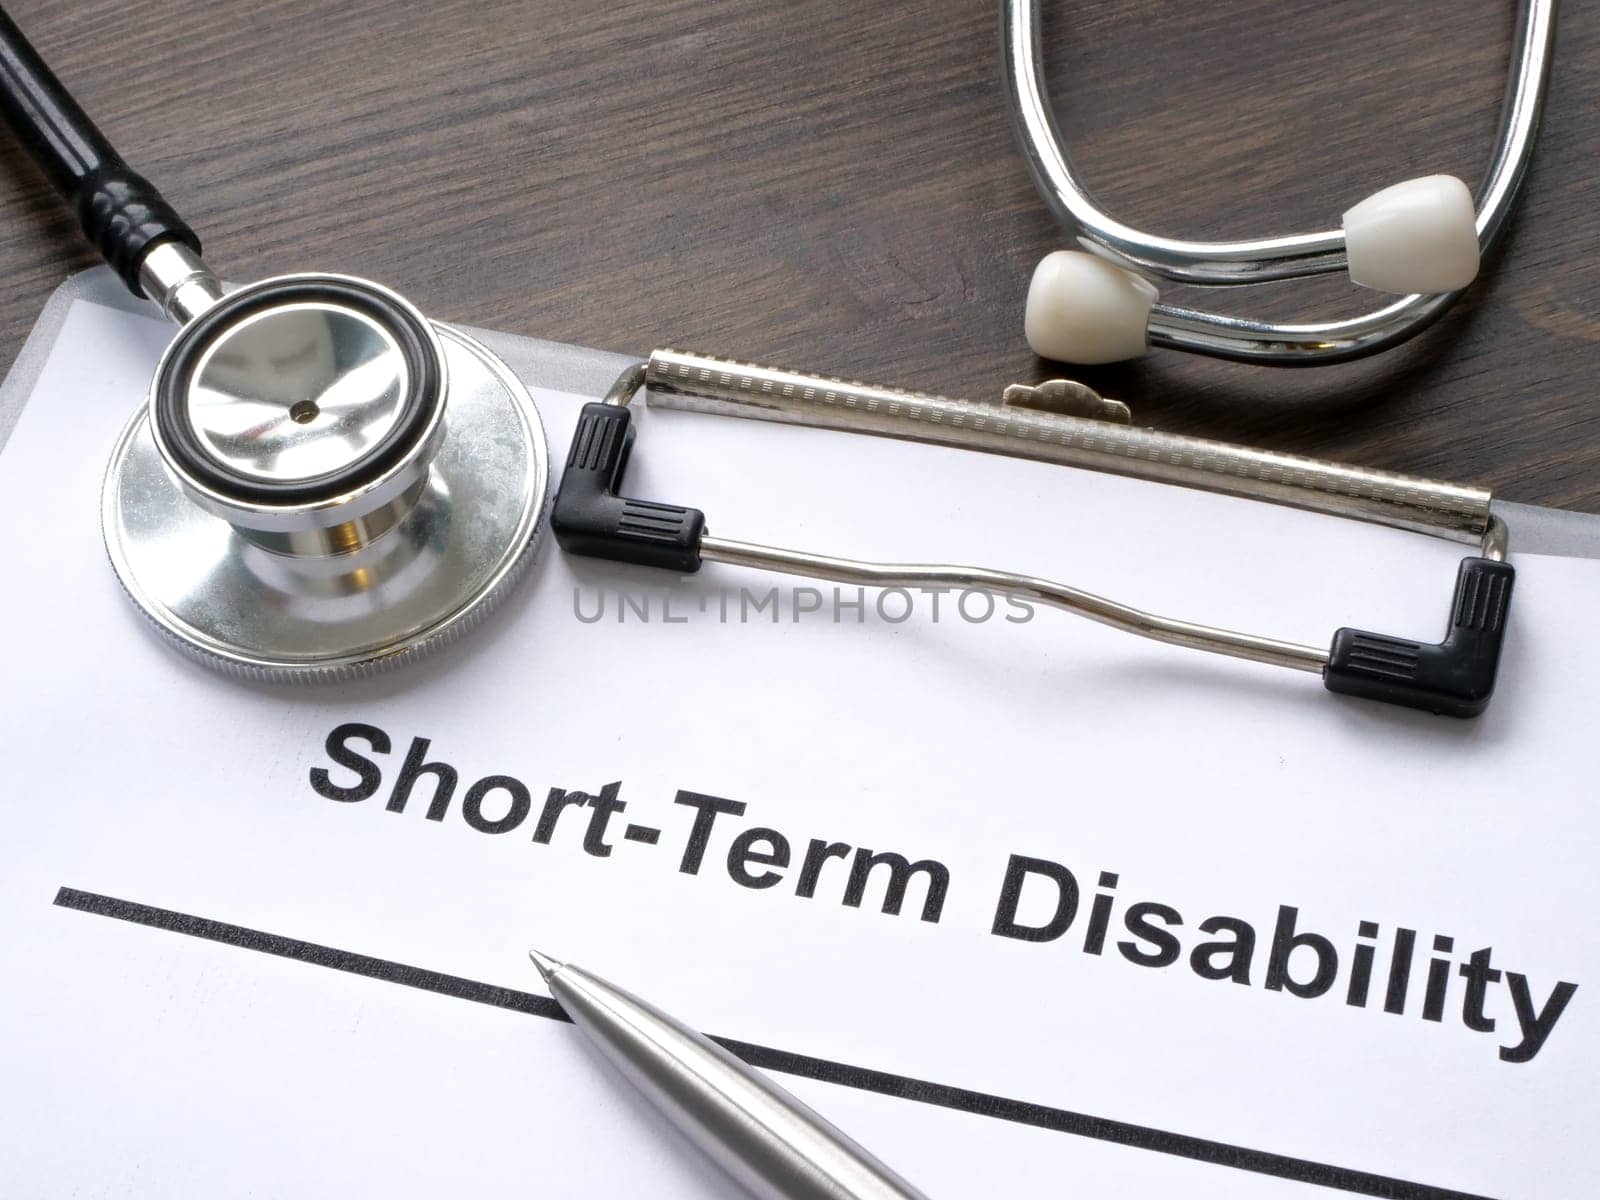 Documents about short term disability and a stethoscope.